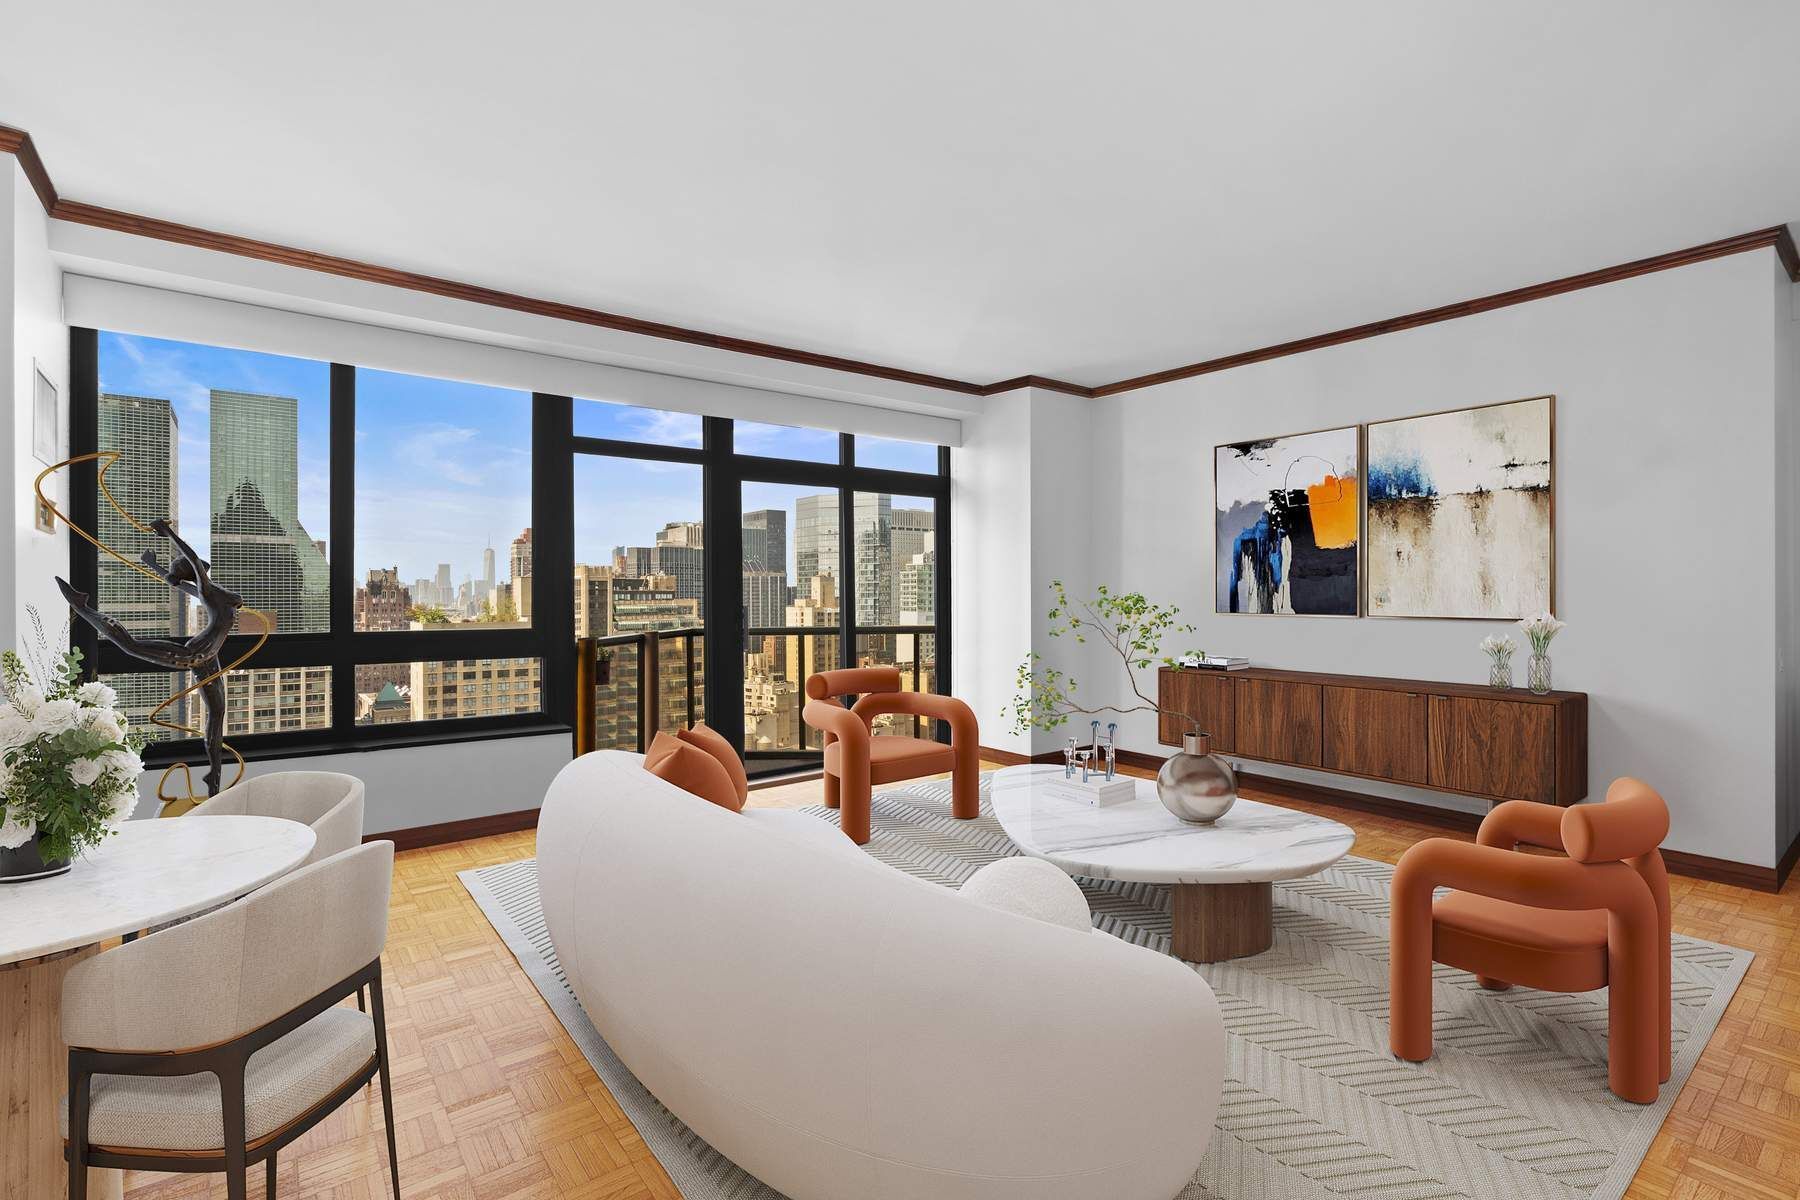 100 United Nations Plaza 37C, Turtle Bay, Midtown East, NYC - 2 Bedrooms  
2.5 Bathrooms  
5 Rooms - 